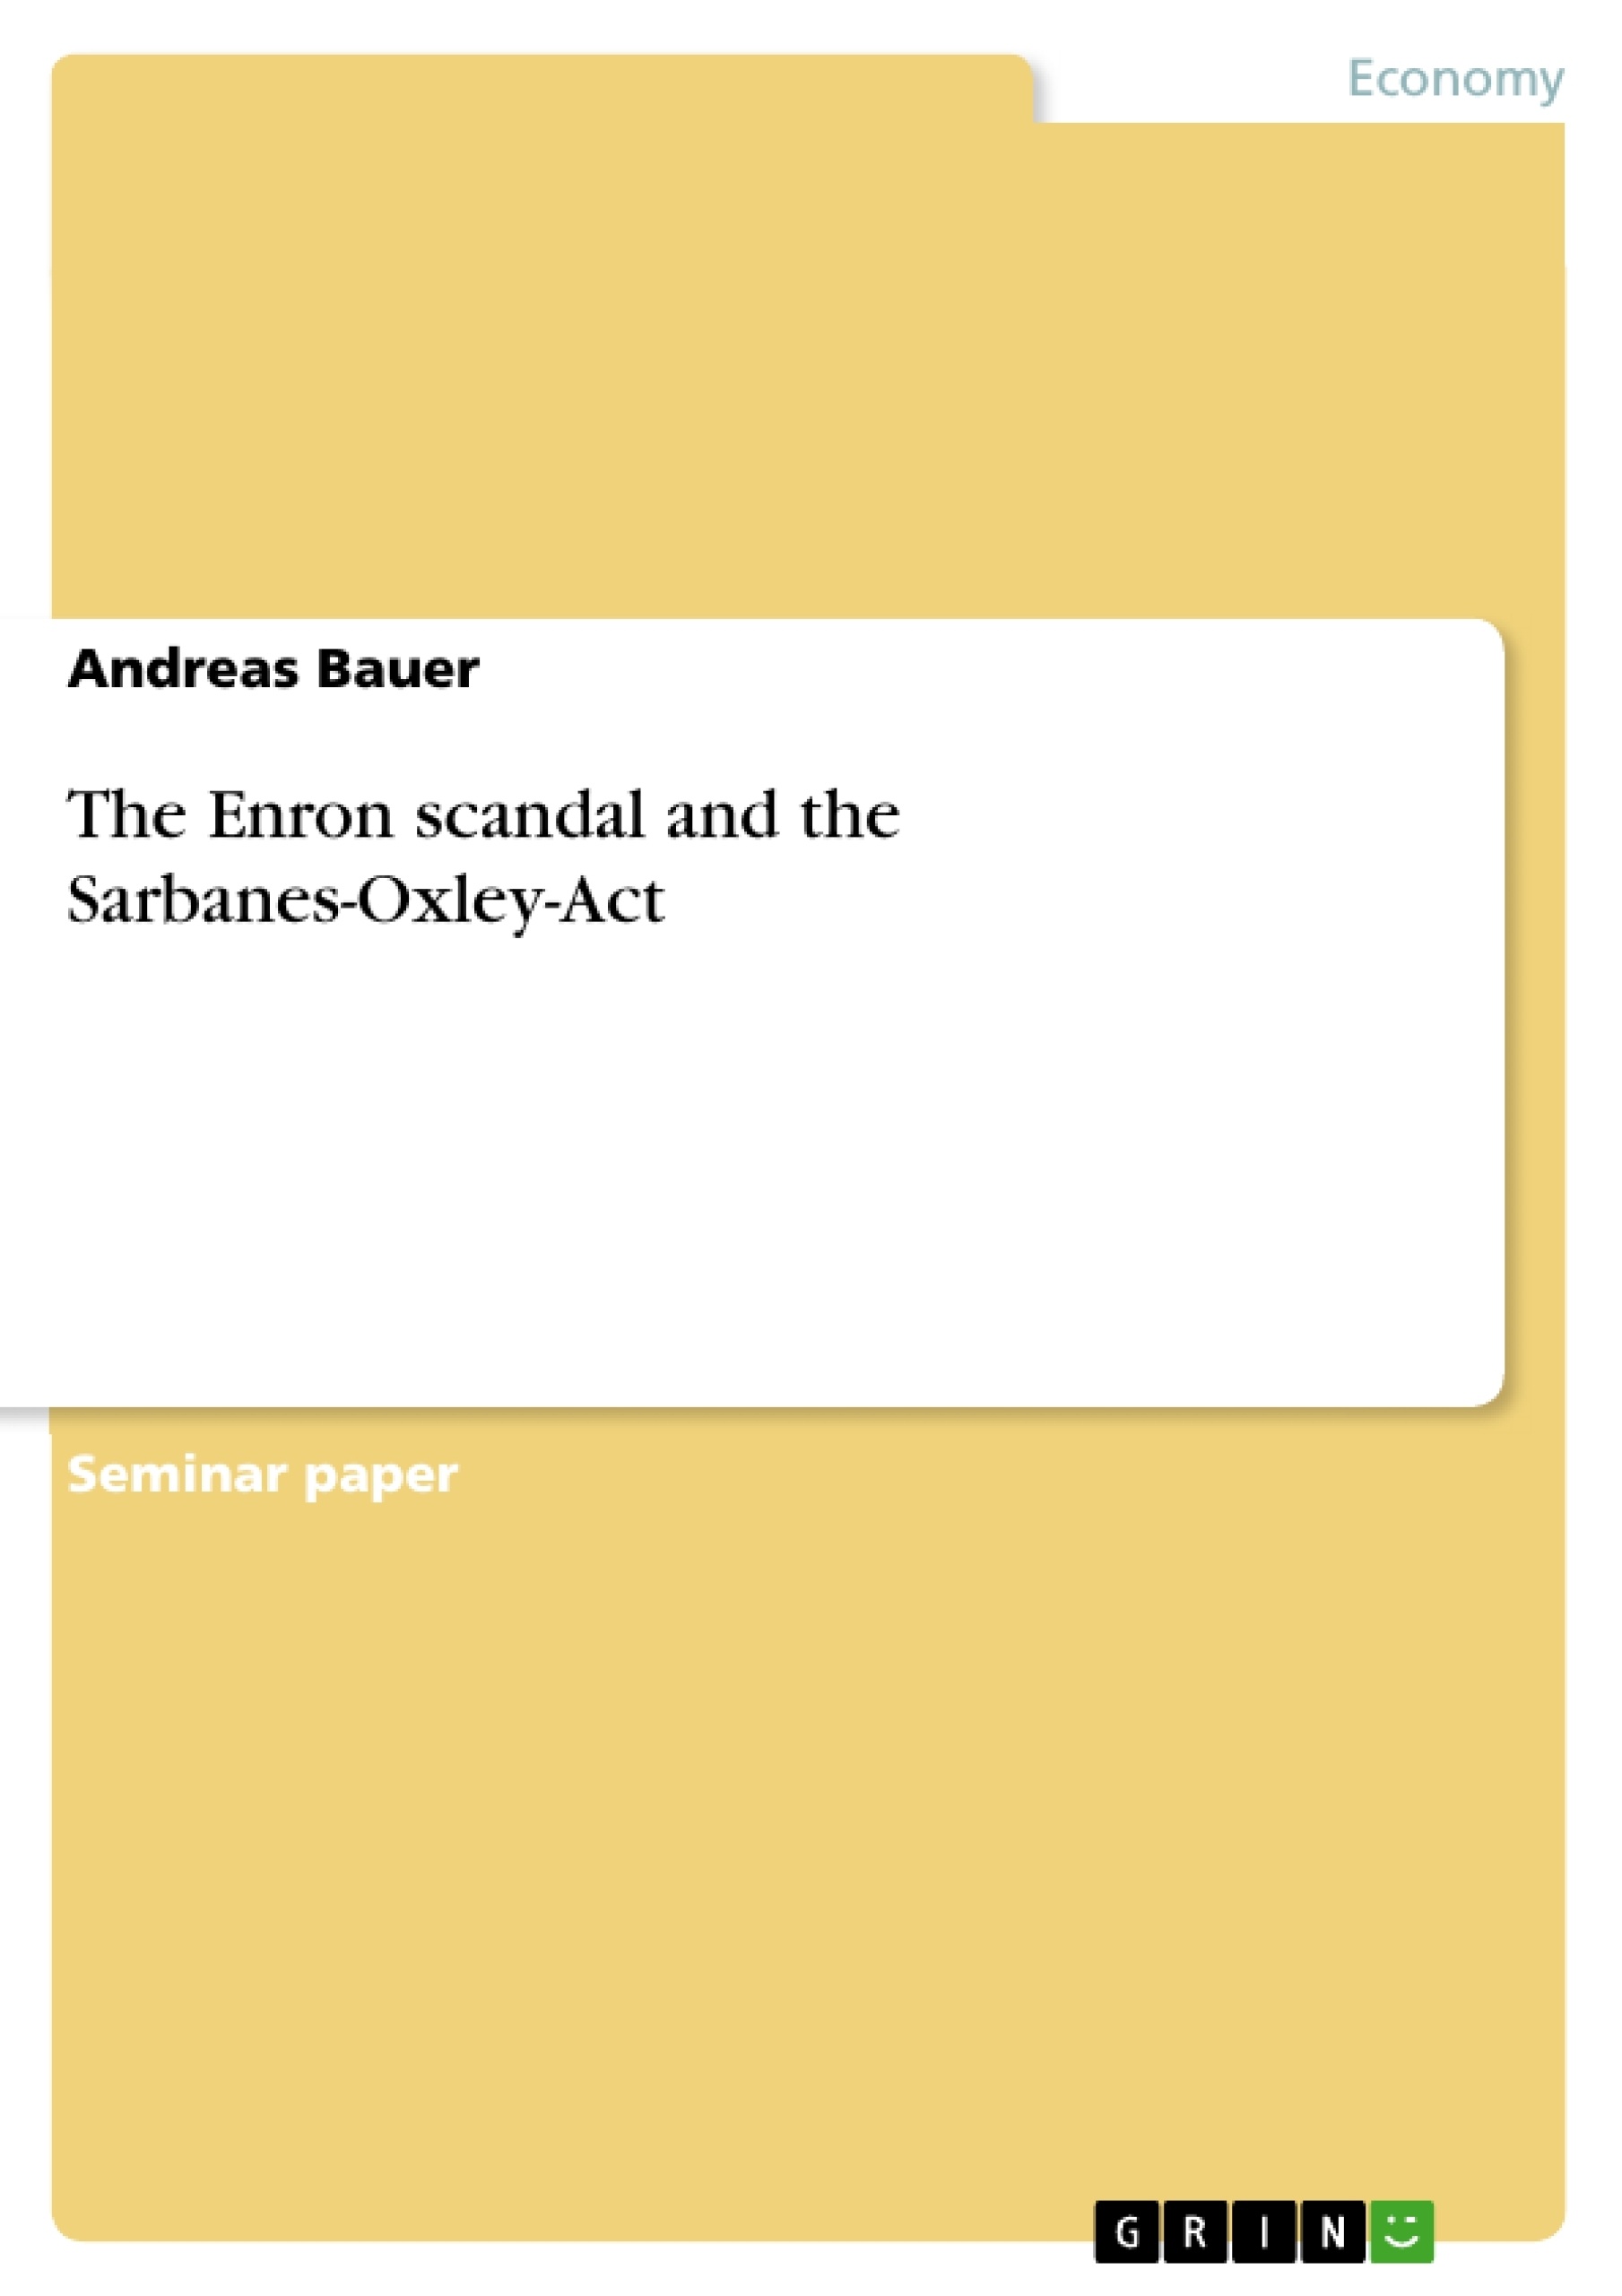 Title: The Enron scandal and the Sarbanes-Oxley-Act